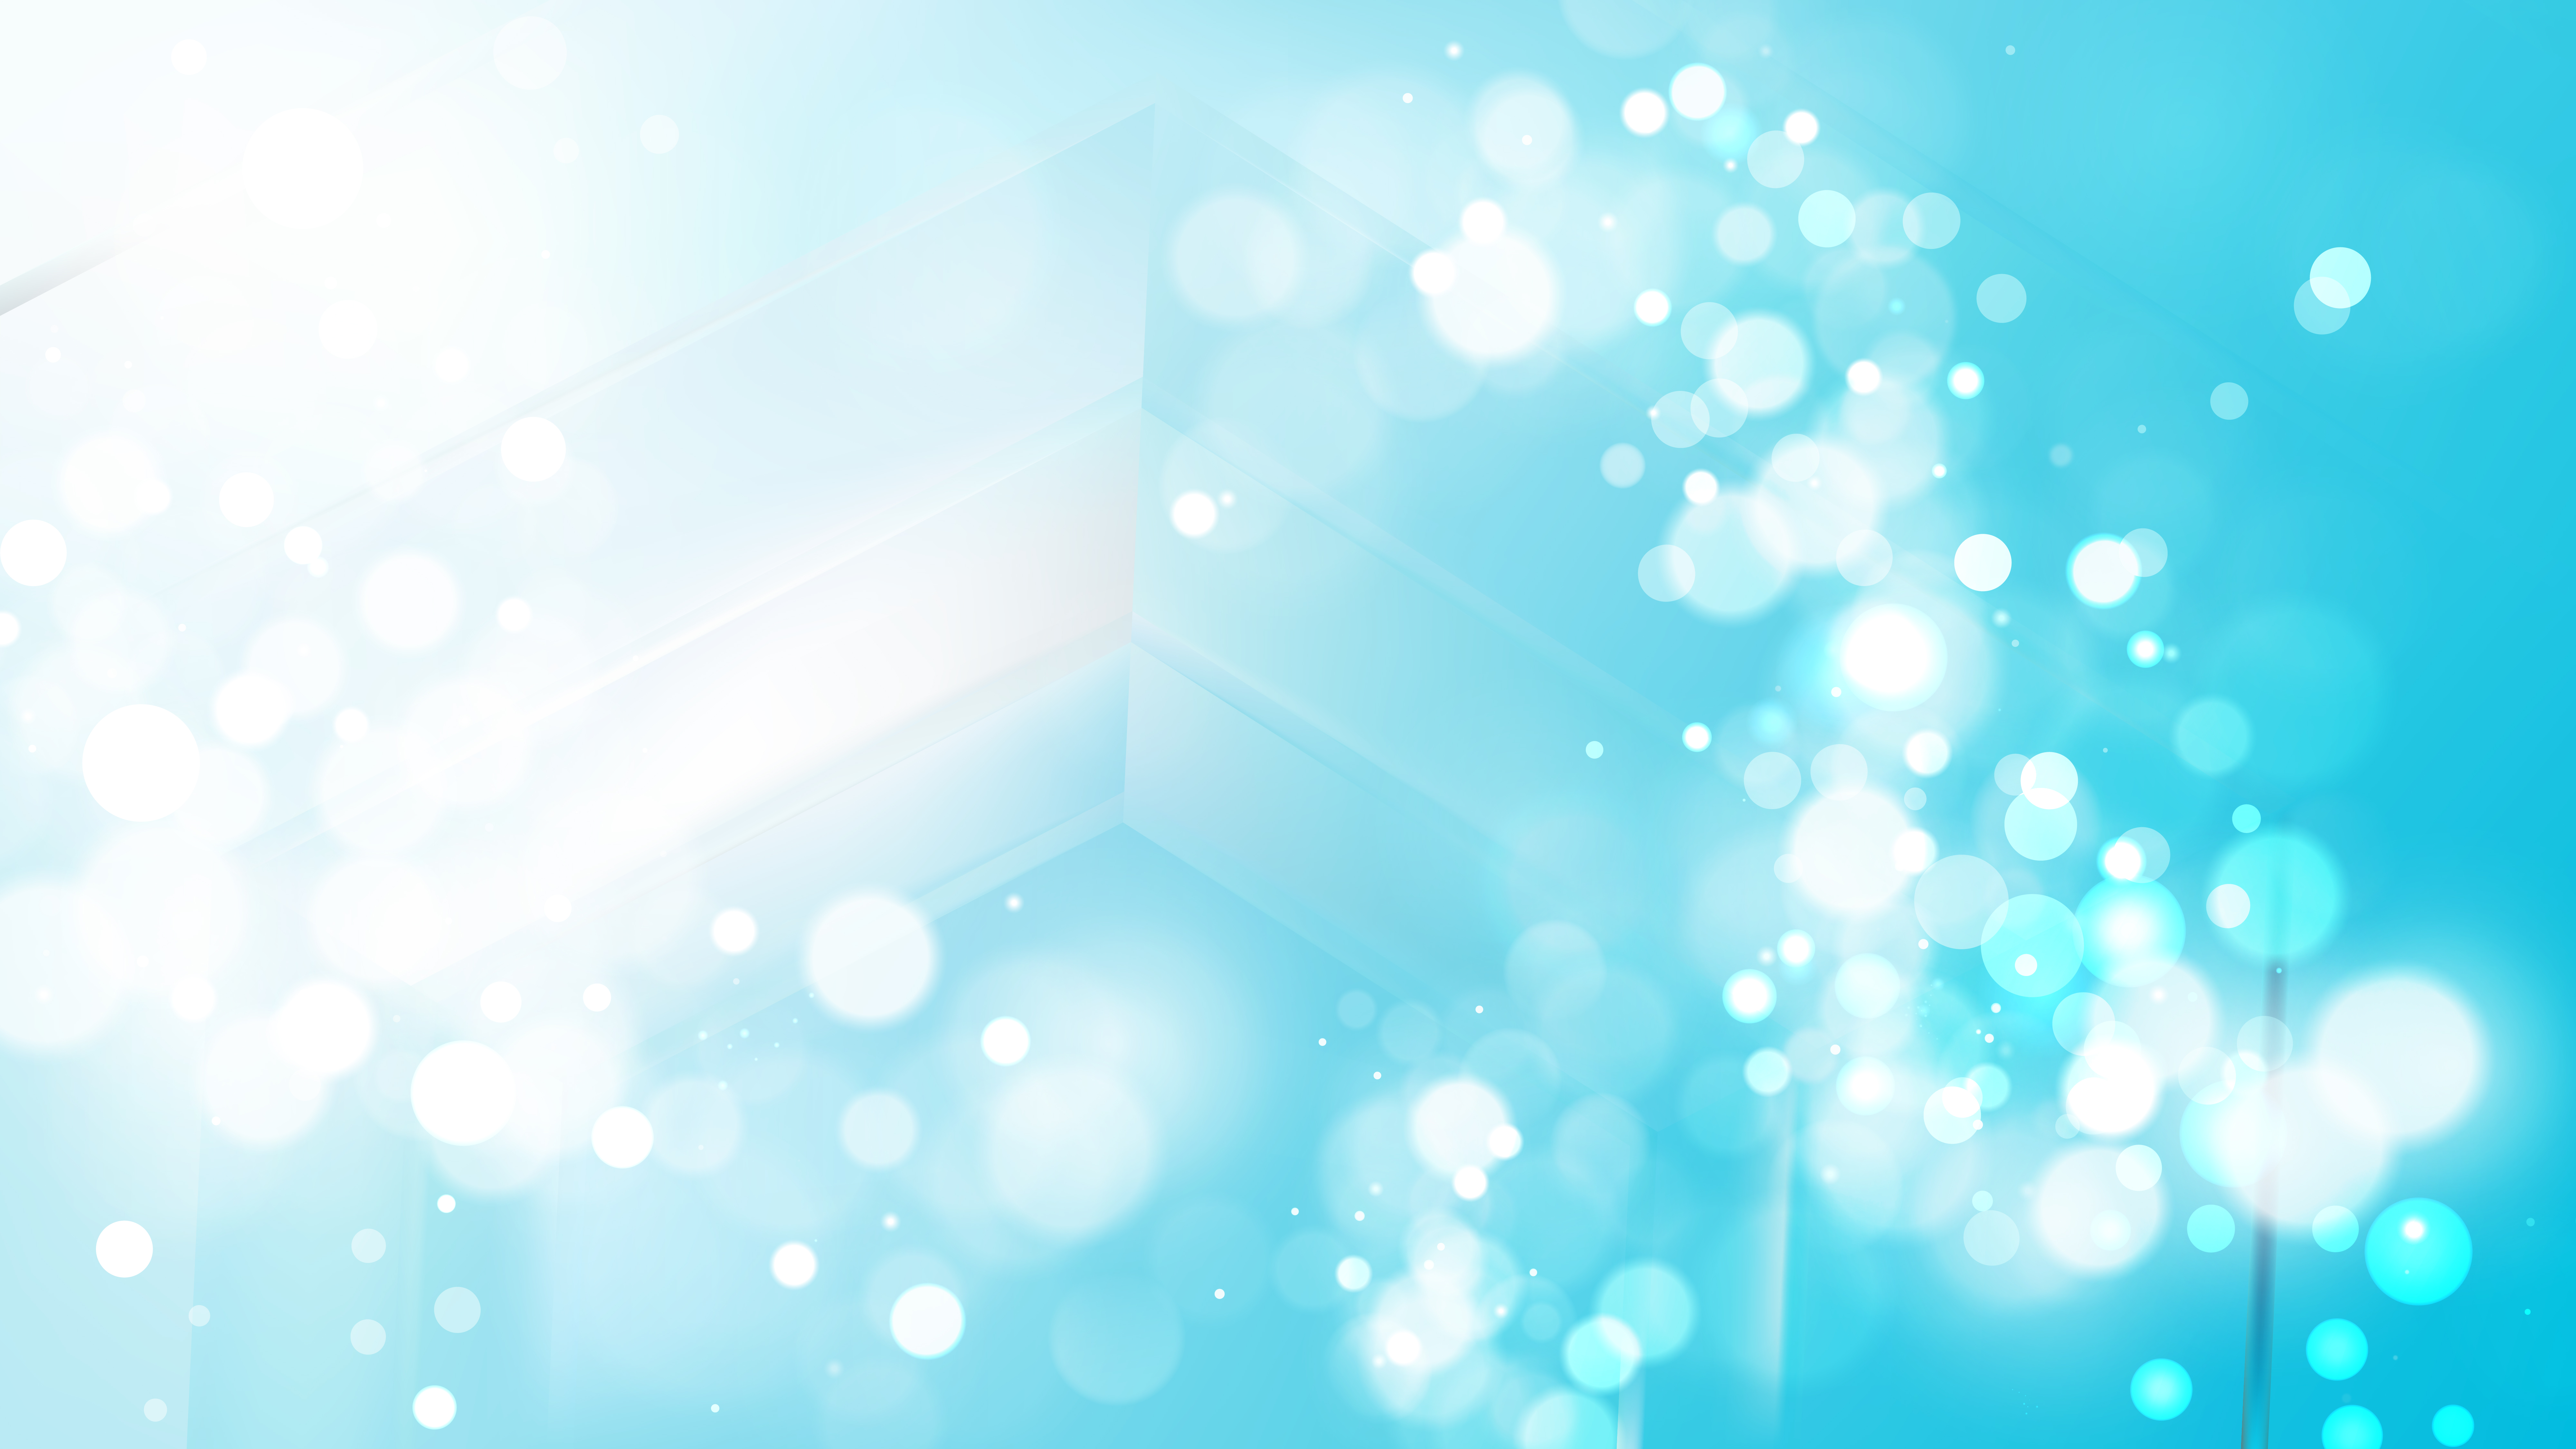 Abstract Blue And White Defocused Background Vector